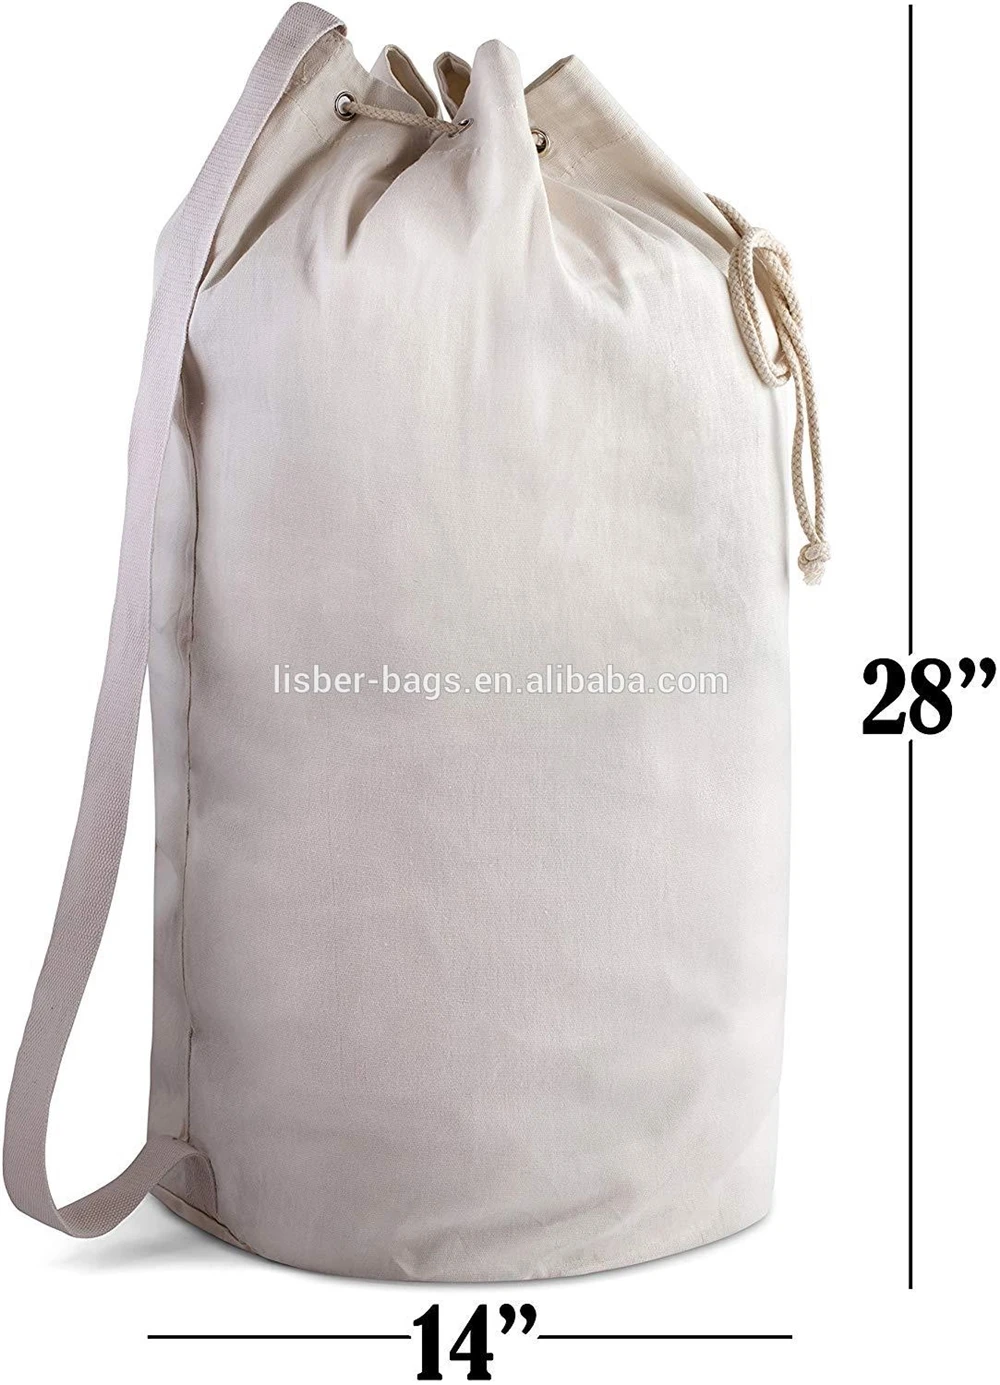 Small Laundry Bag, Drawstring, Closure, Grommets, for Home and